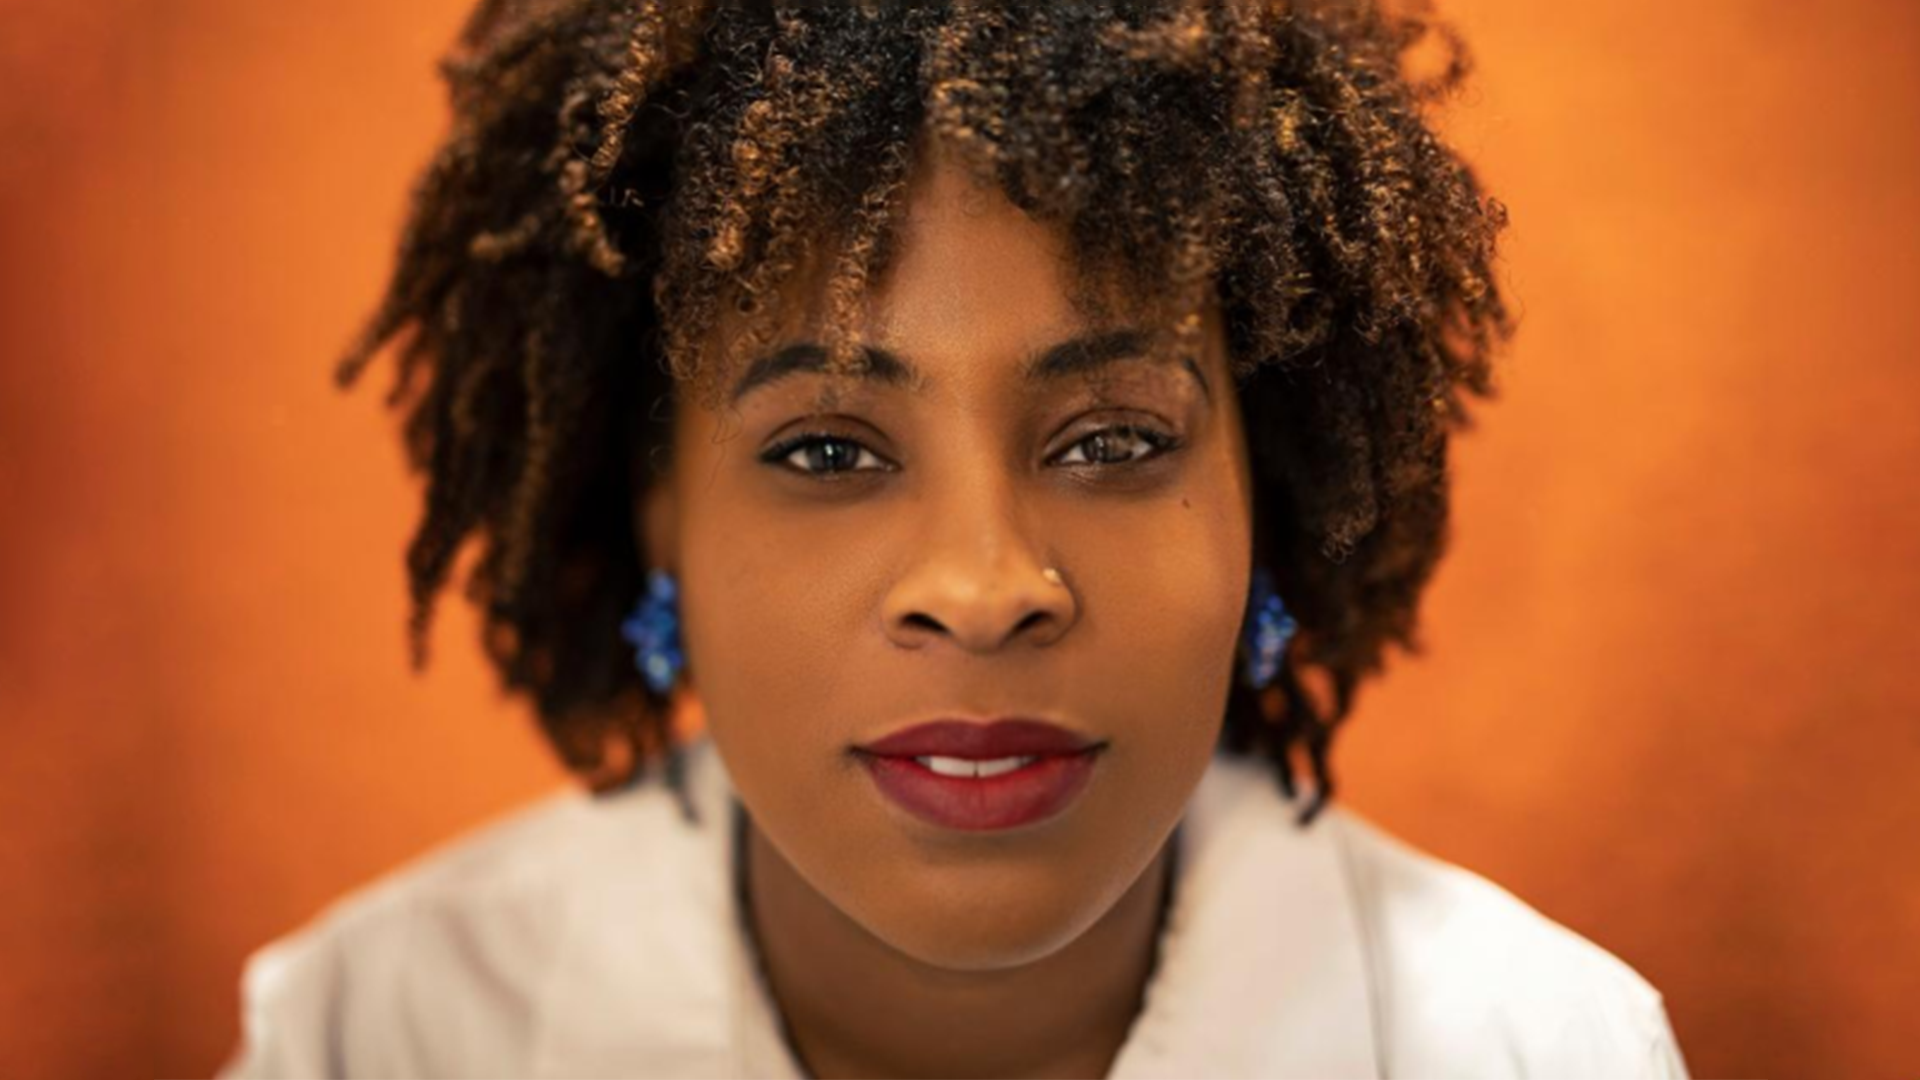 Ashley Edwards May be the First Black Woman in New Jersey to Raise Over  Million in Venture Capital Funds